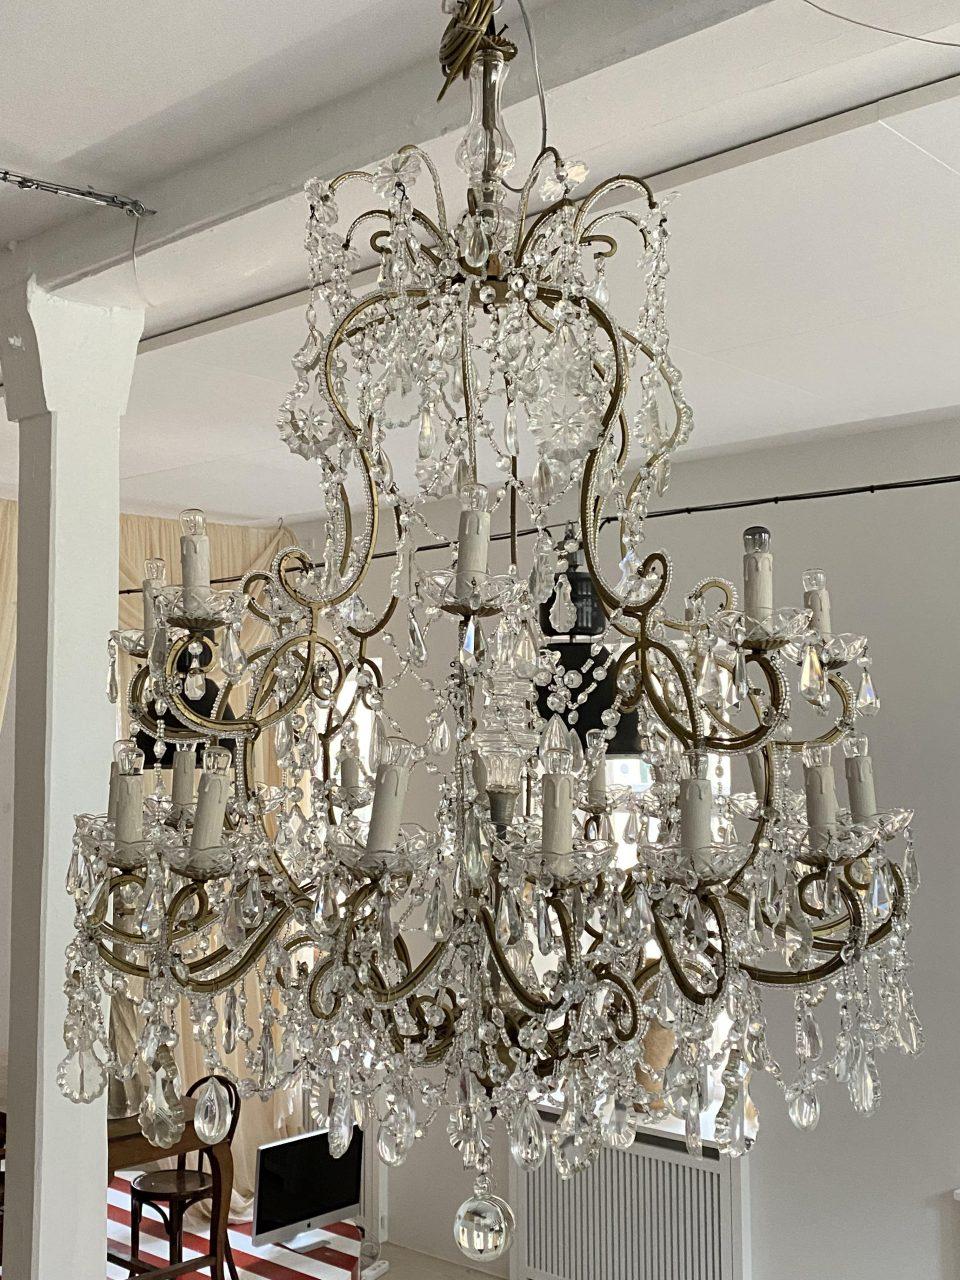 Sumptuously beautiful and voluminous cage-shaped prism chandelier, from circa 1920s-30s France. Of a kind one only really sees in French chateaus and mansions or grand hotels. The chandelier has an abundance of clear prism anchors and beautiful